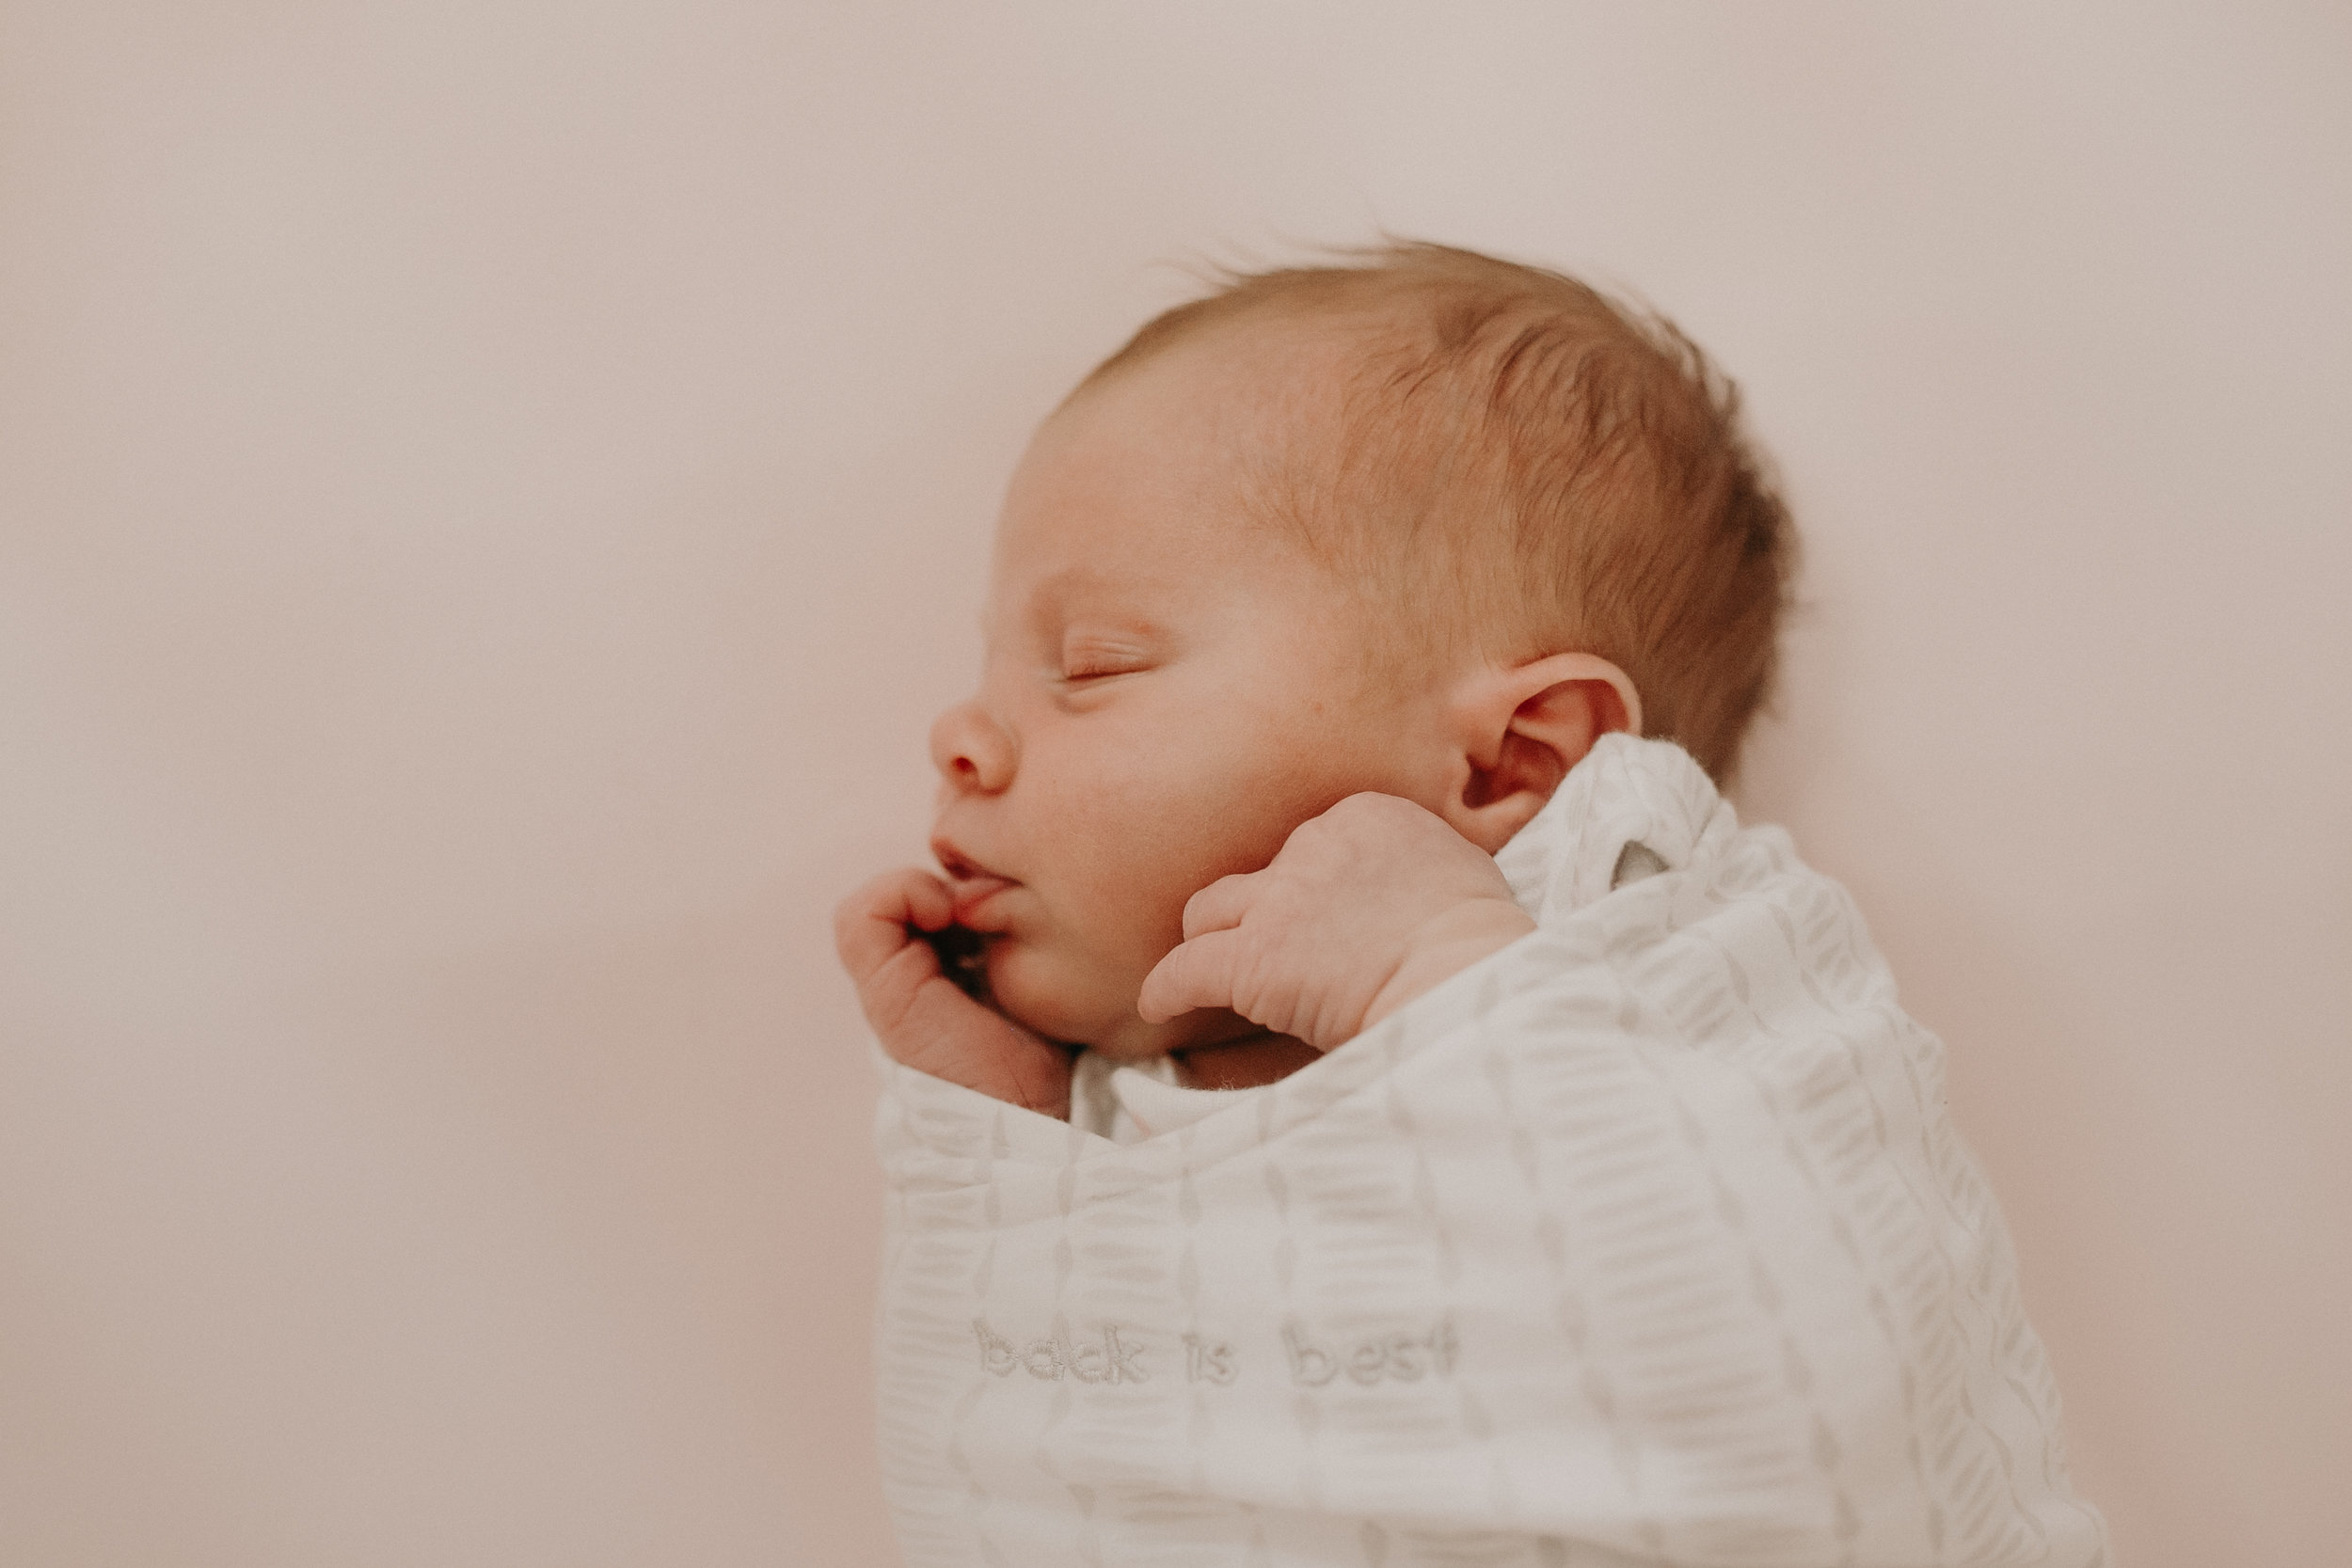  newborn lifestyle photographer Andrea Wagner captures cute baby wrapped up in her crib 